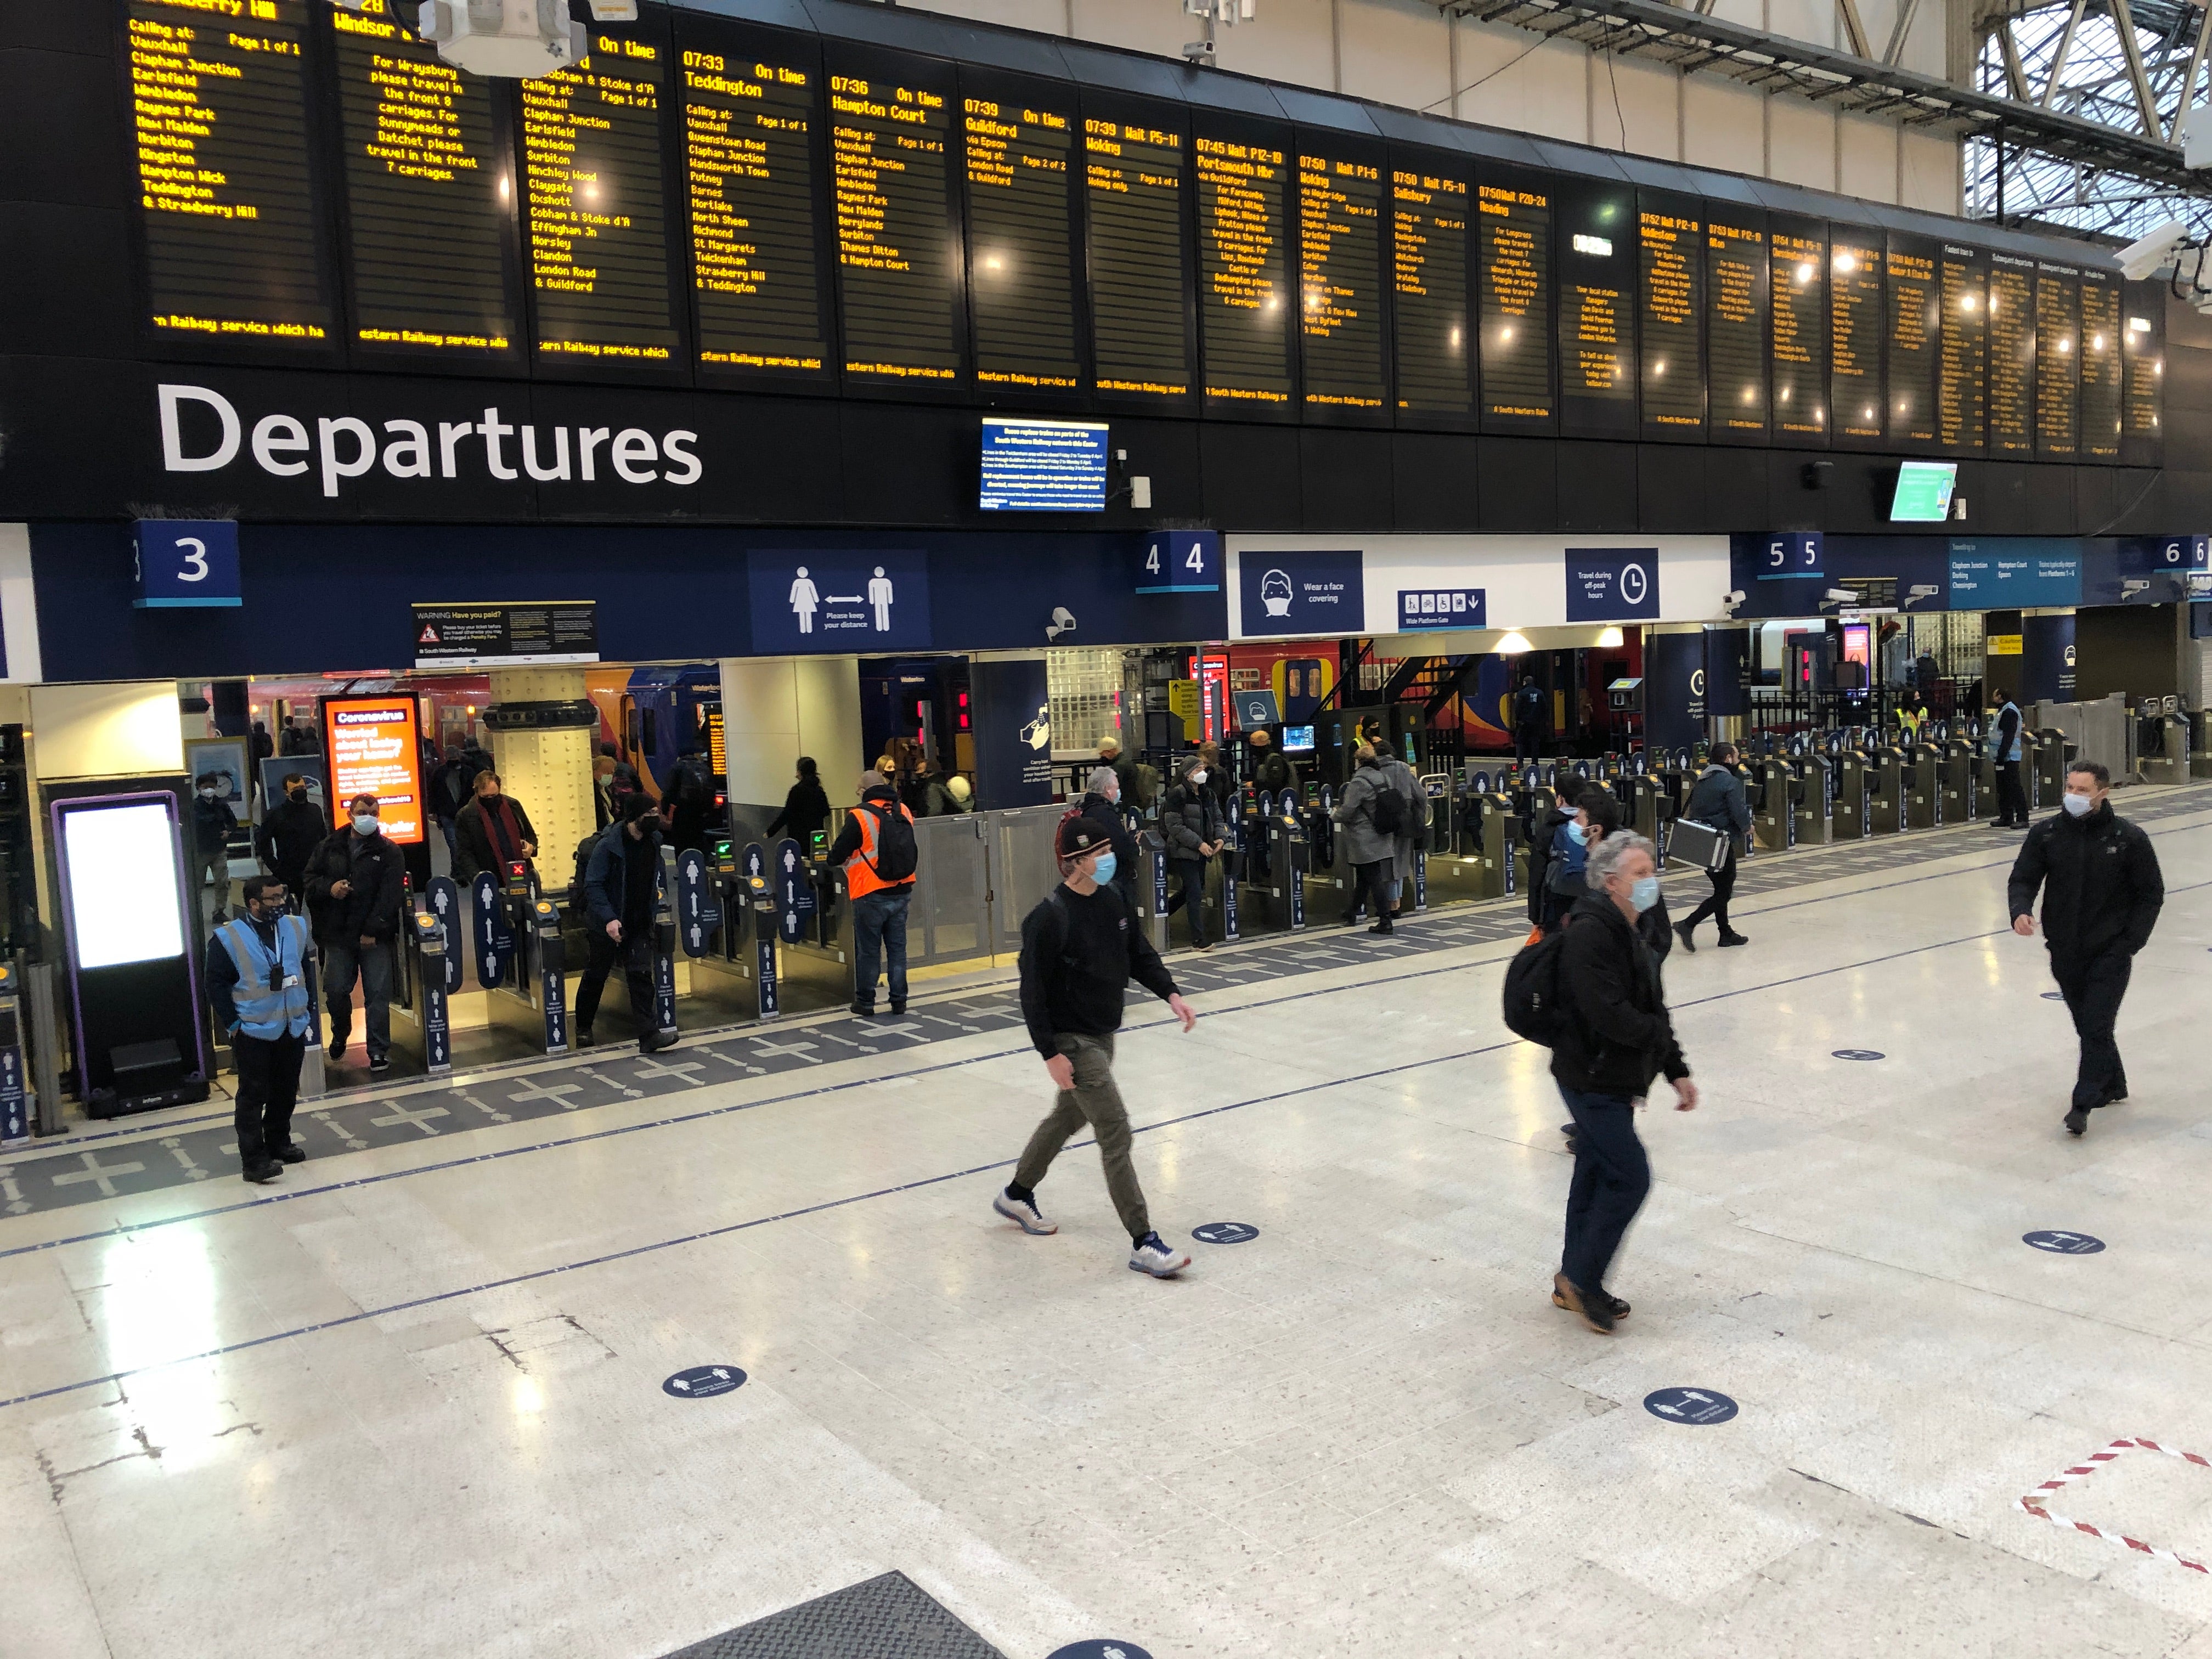 Normal service: Waterloo station in London, the busiest transport terminal in Britain